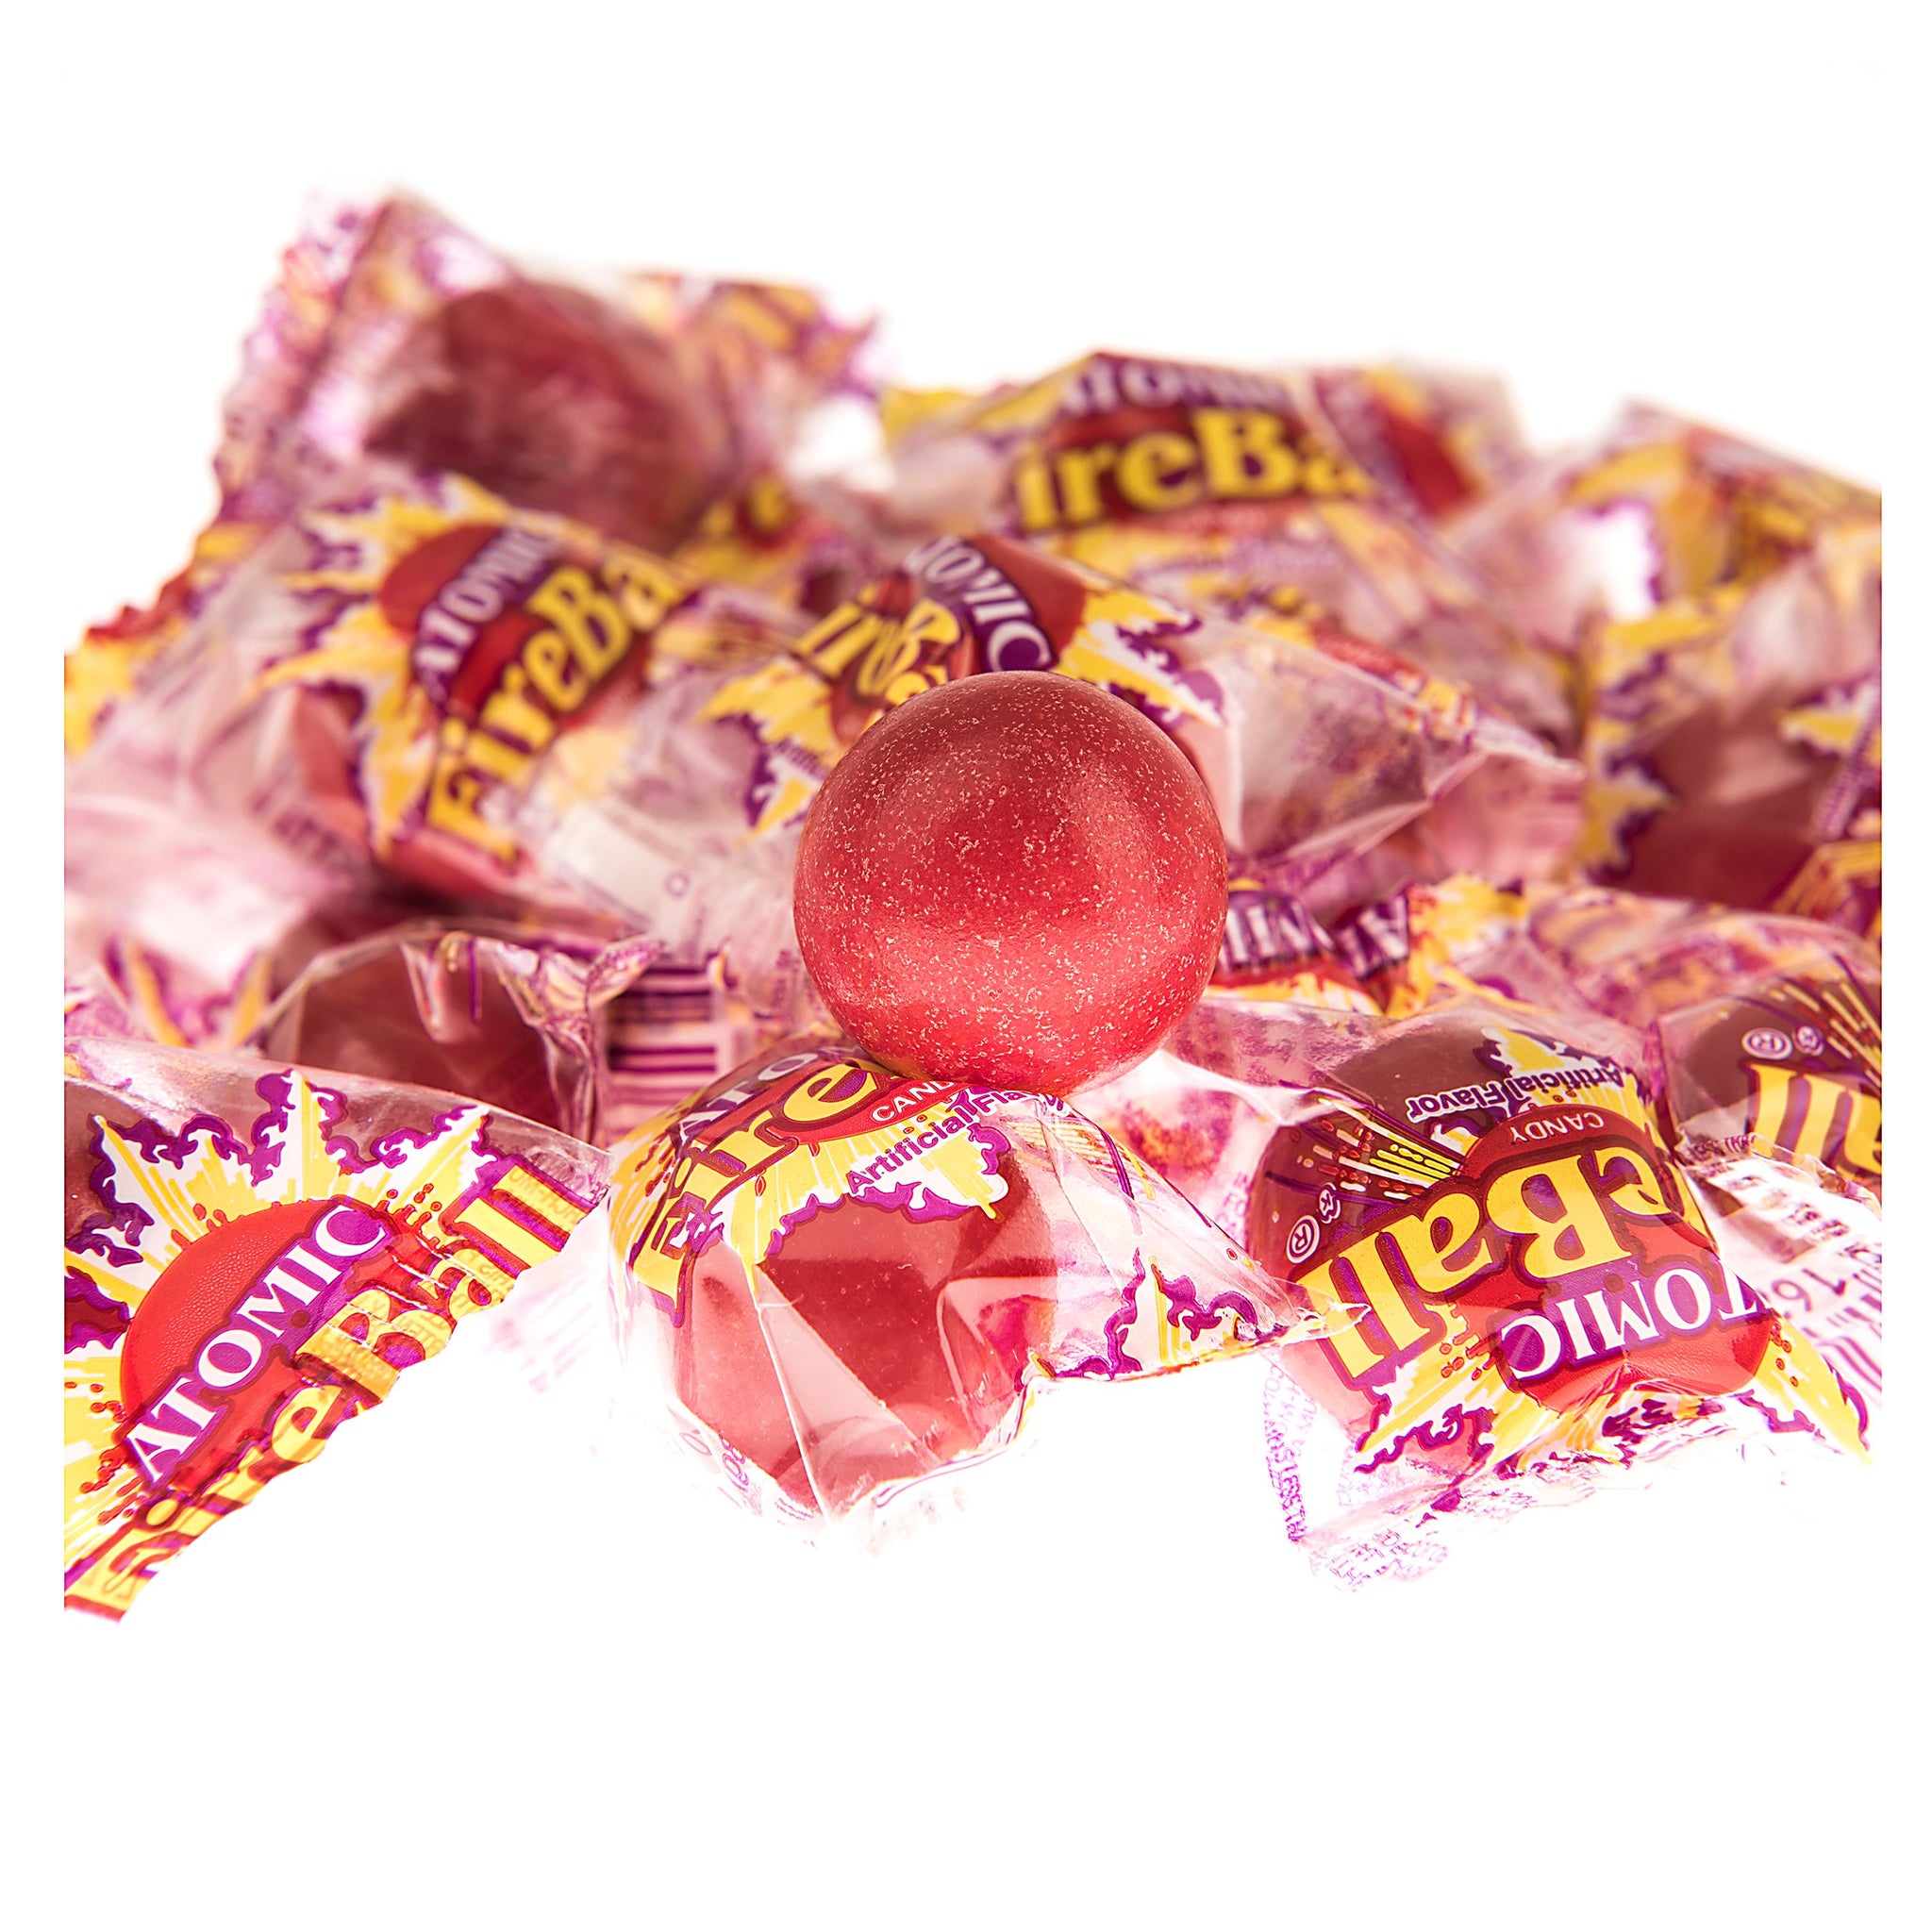 Atomic Fire Ball Cinnamon Flavored Candy, 30 Oz